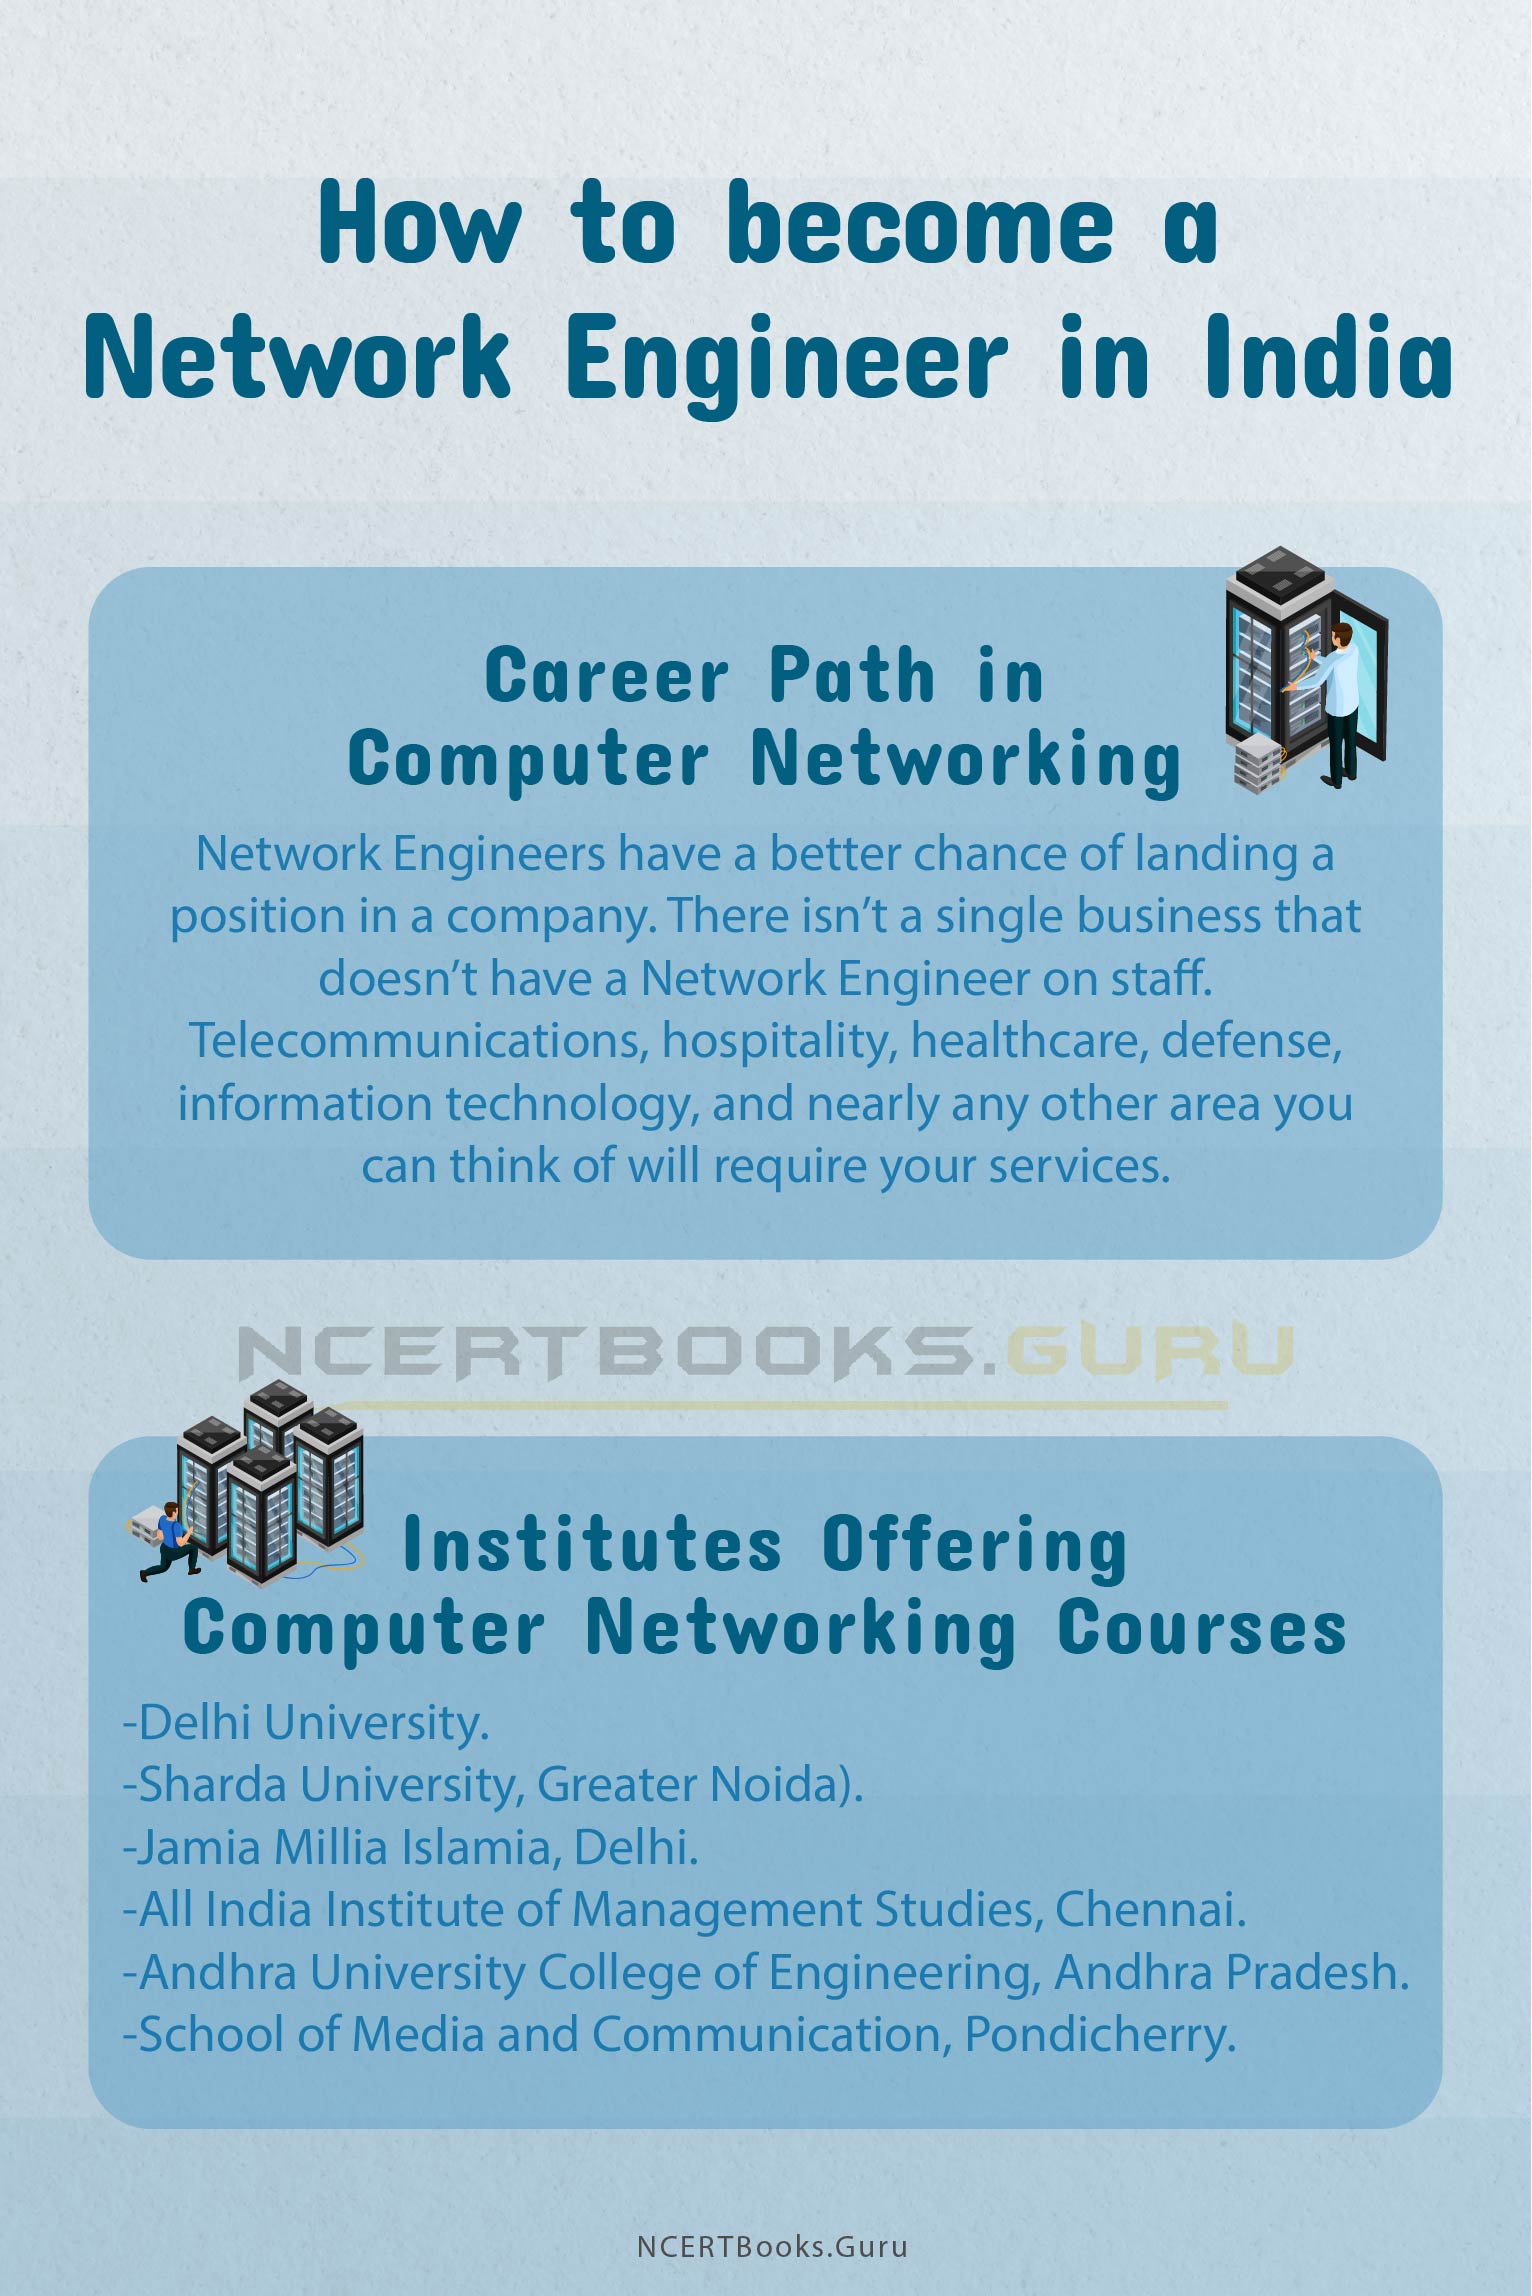 How to become a Network Engineer in India 2